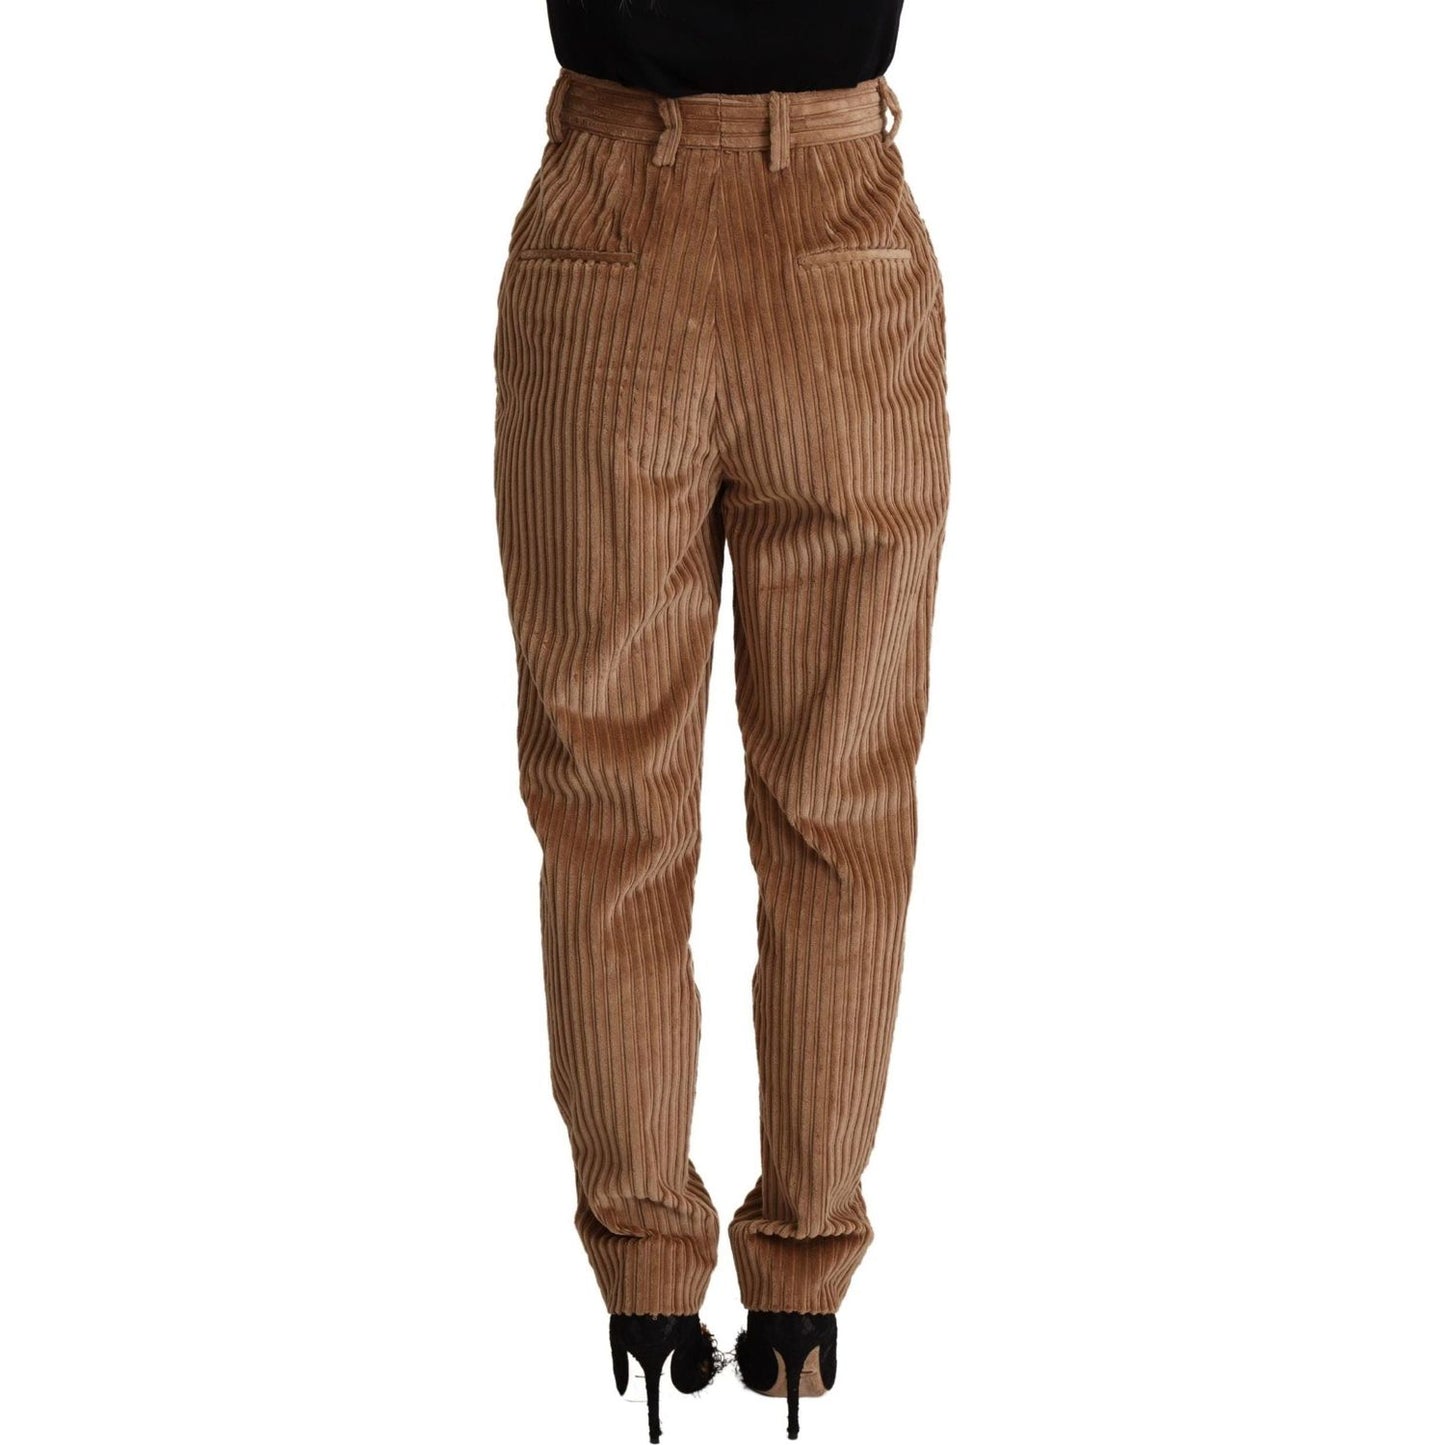 Dolce & Gabbana Elegant High-Waisted Tapered Corduroy Pants brown-corduroy-cotton-trouser-tapered-pants